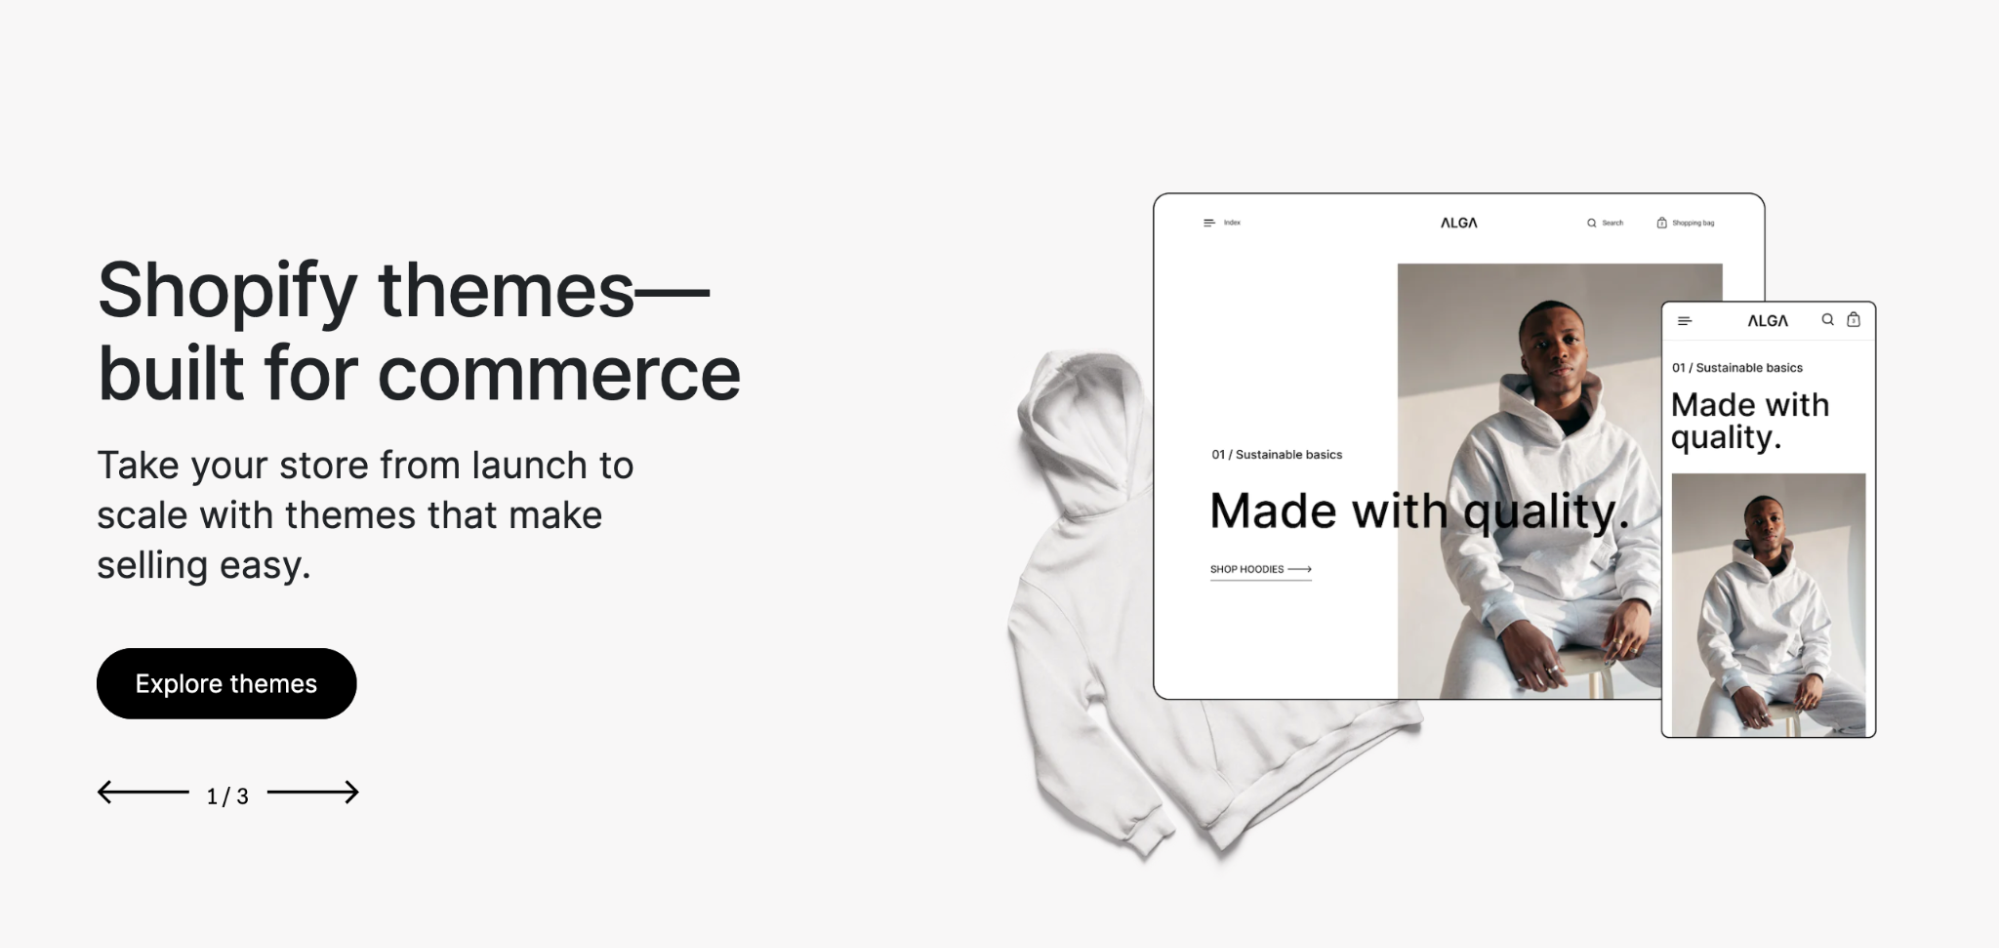 A Shopify landing page with basic information about Shopify Themes